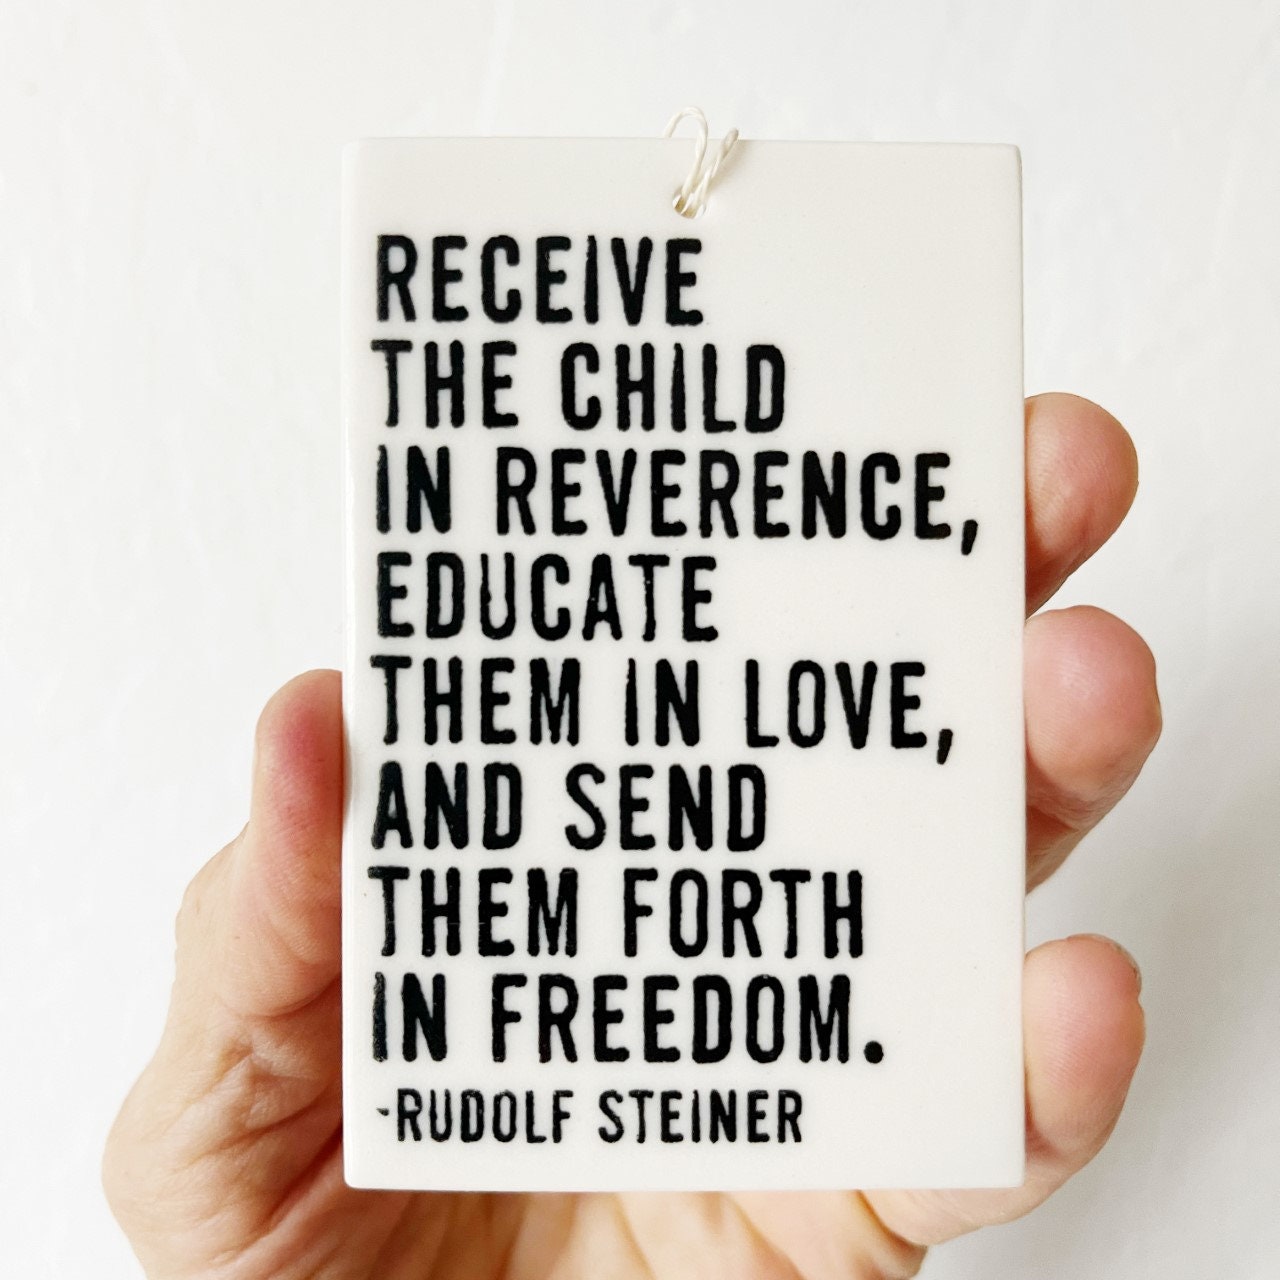 rudolf steiner | anthroposophy | waldorf education | ceramic wall tag | ceramic wall art | receive the child reverence | new parent | child